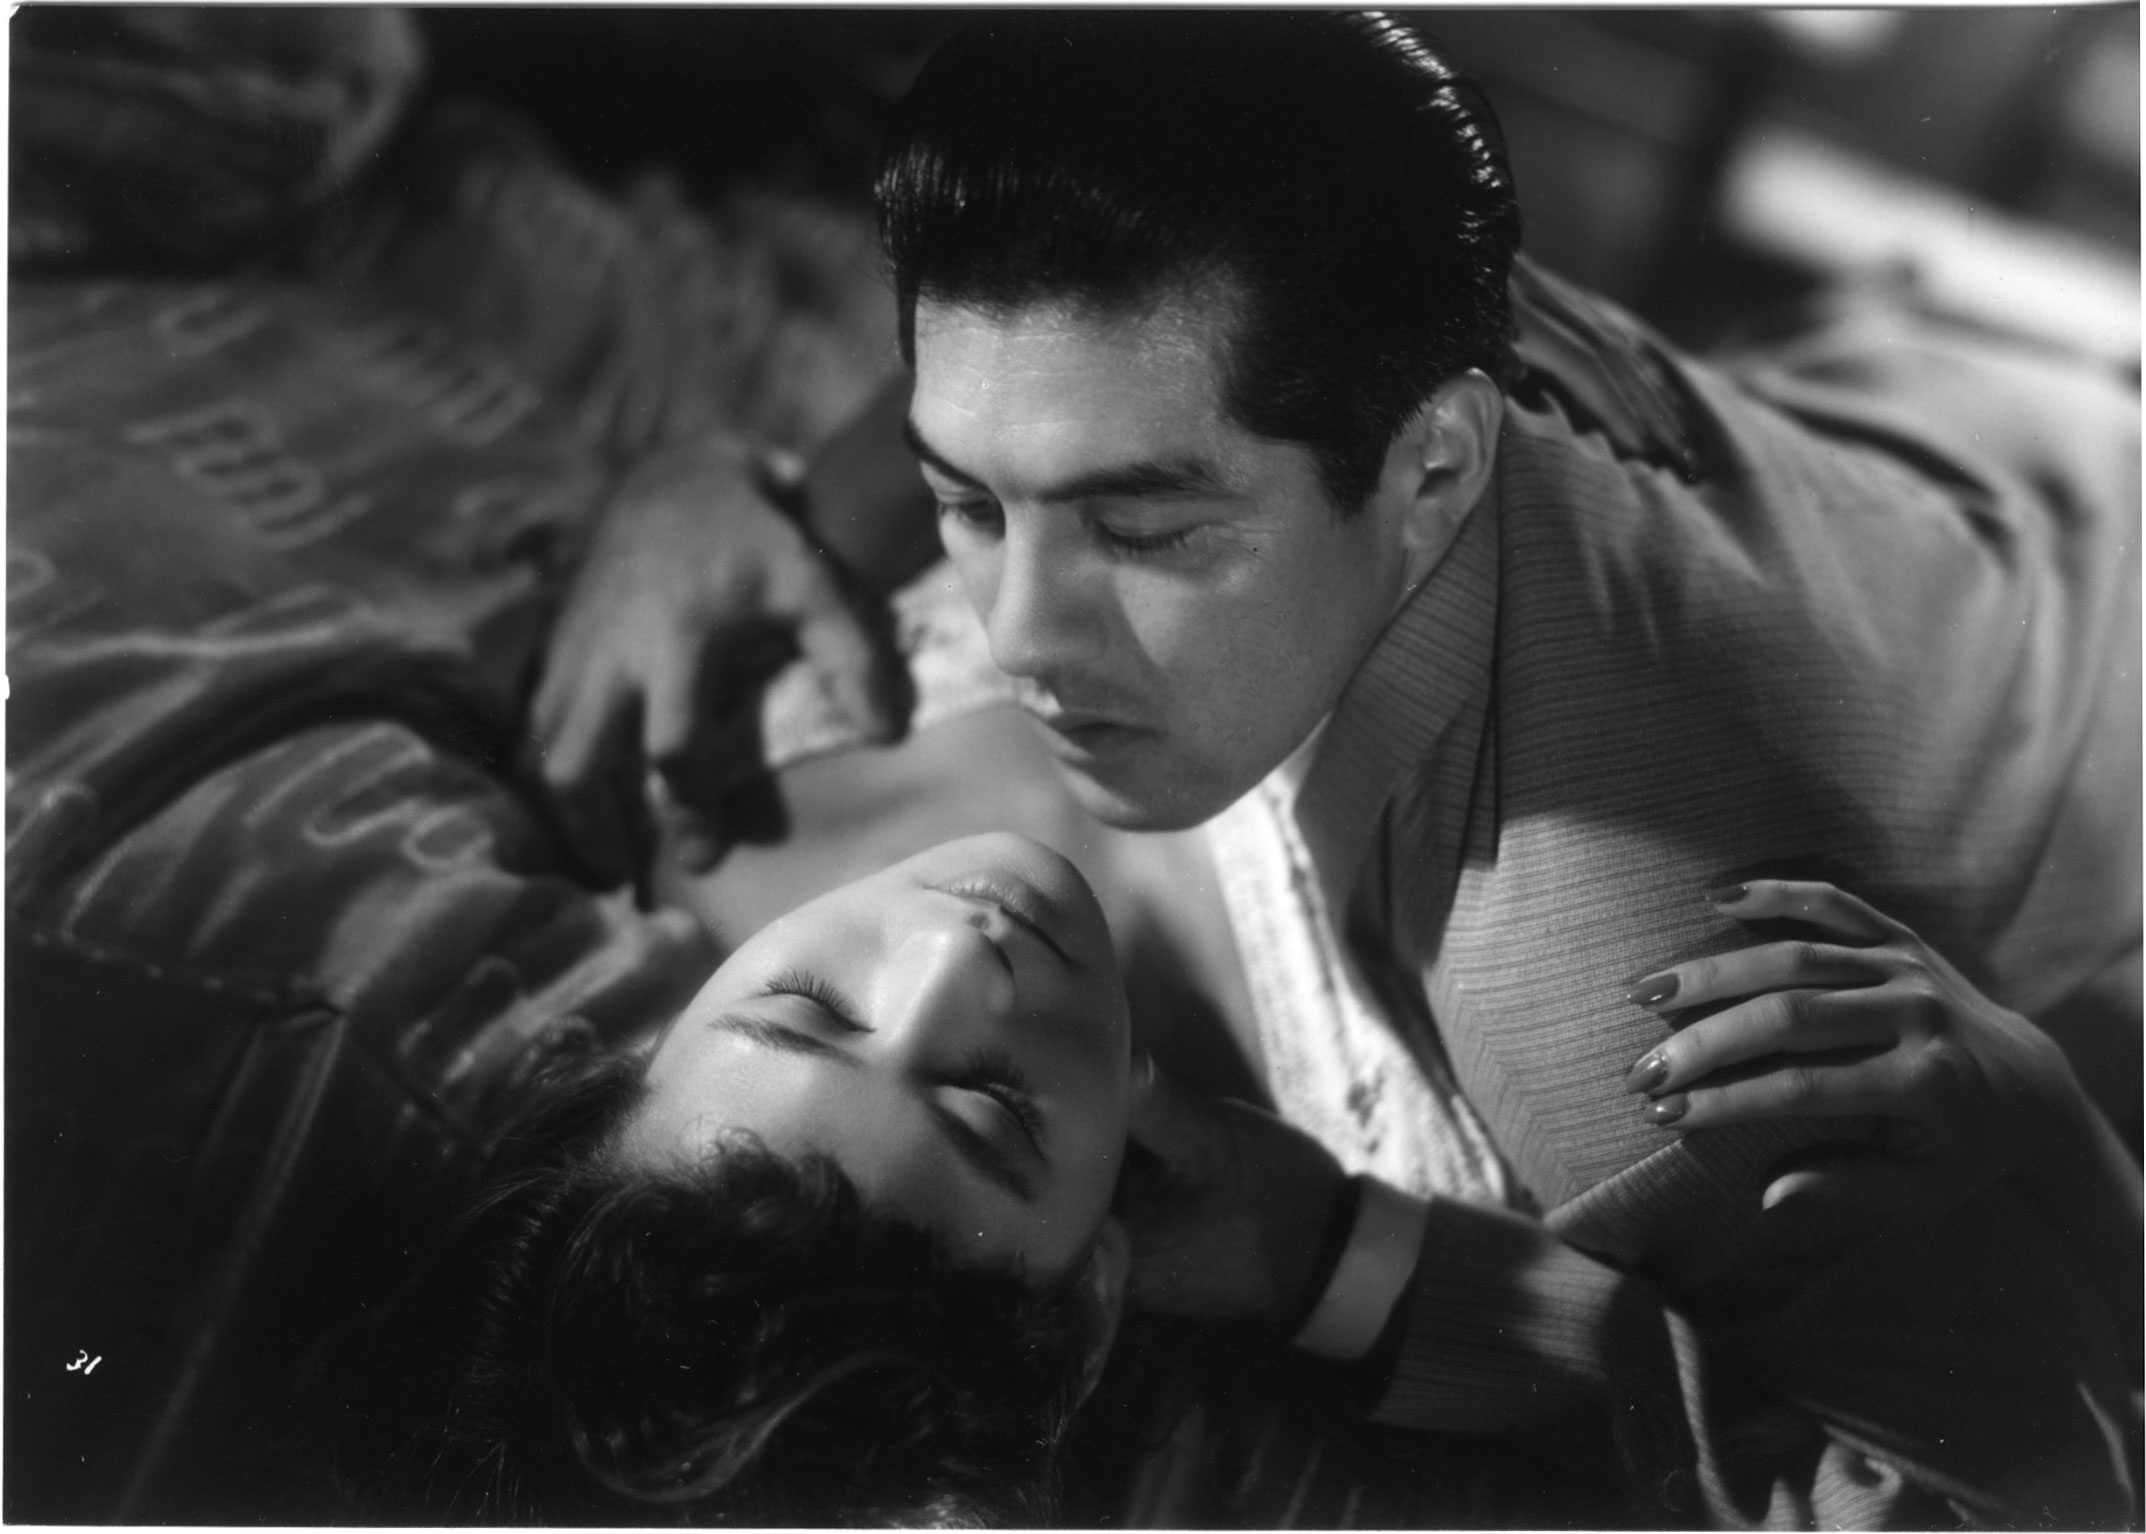 A Hole of My Own Making. 1955. Japan. Directed by Tomu Uchida. Courtesy of National Film Center, The National Museum of Modern Art, Tokyo